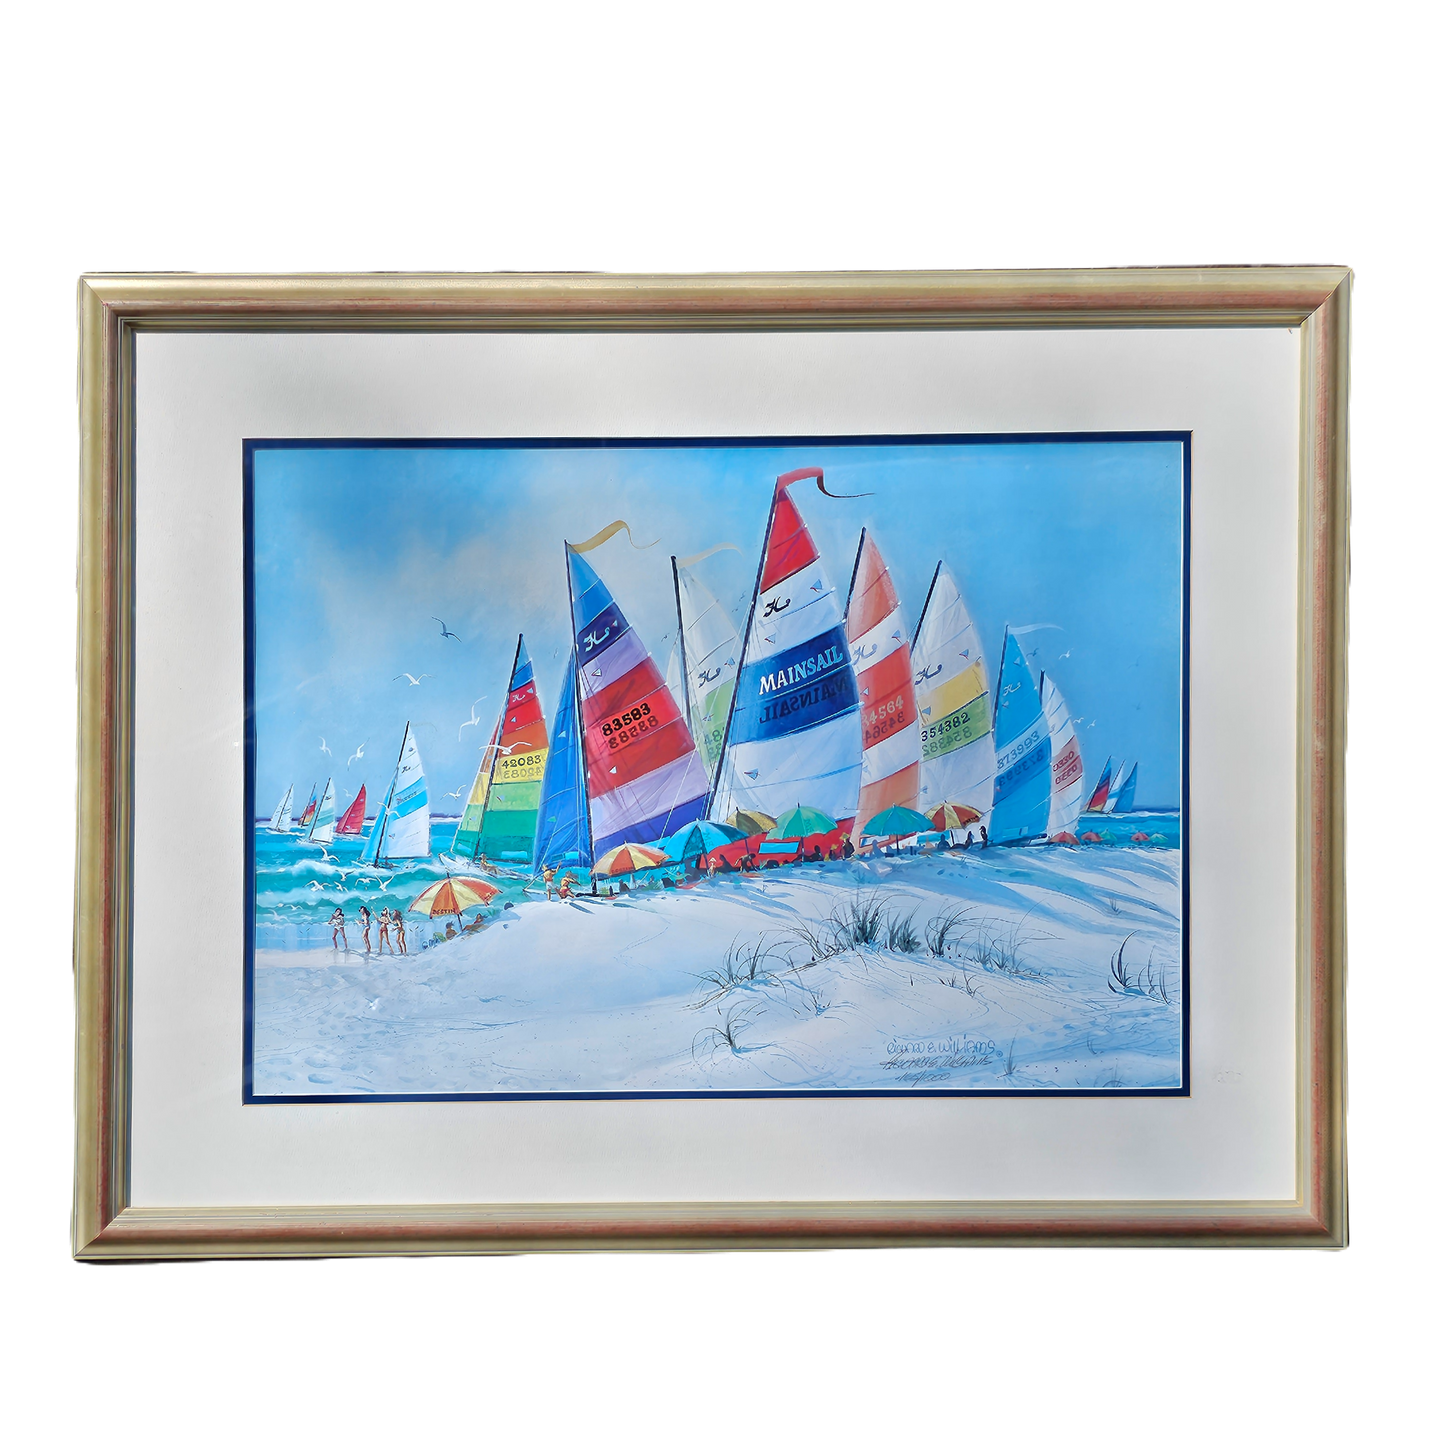 Richard E. Williams Artwork with Sailboats - Limited Edition Lithograph